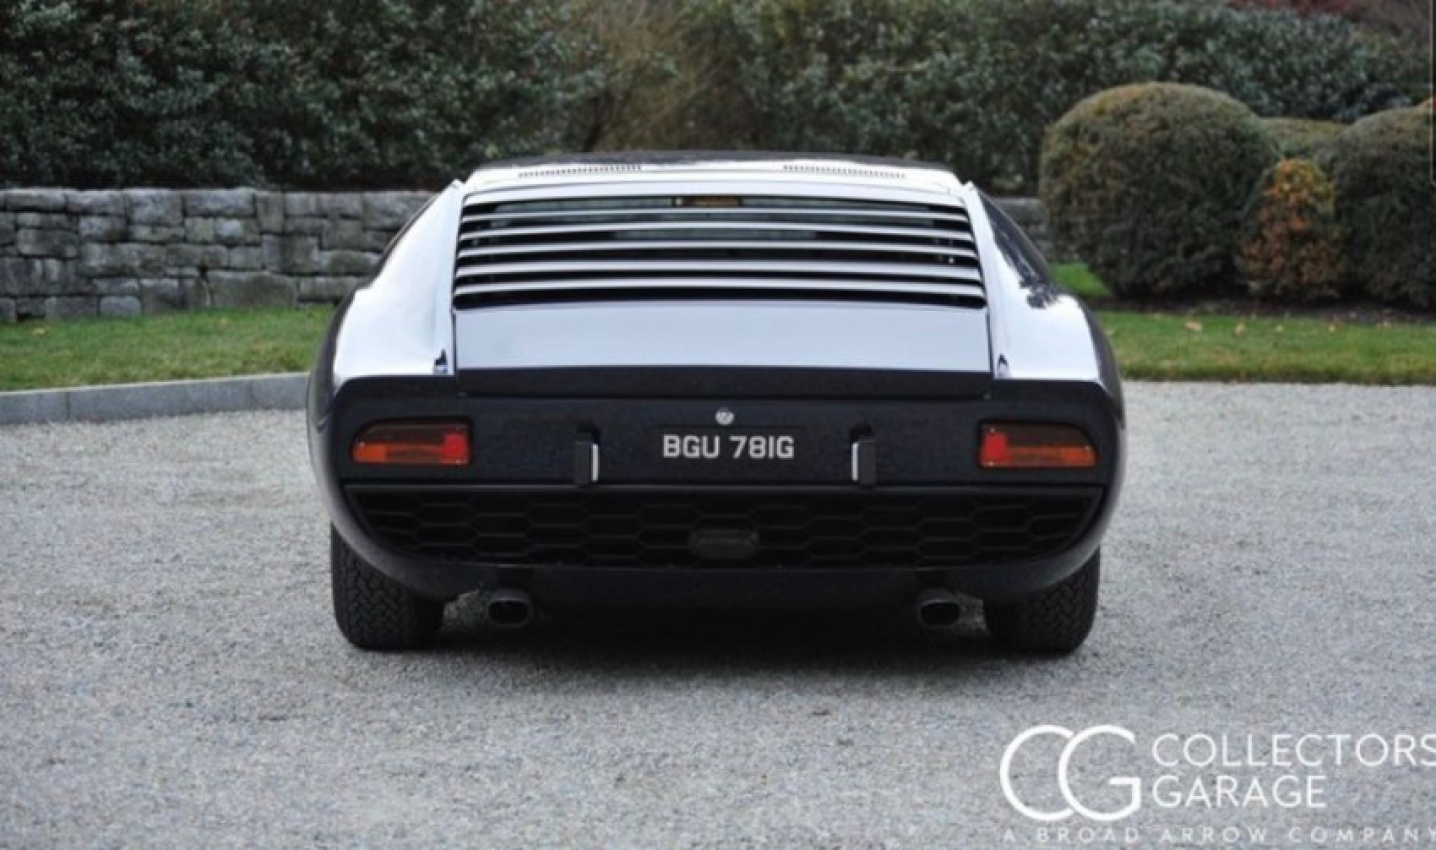 autos, cars, hypercar, lamborghini, american, asian, celebrity, classic, client, europe, exotic, features, handpicked, hotrods, luxury, modern classic, muscle, news, newsletter, off-road, sports, supercar, trucks, 1968 lamborghini miura shows the world what a real supercar looks like